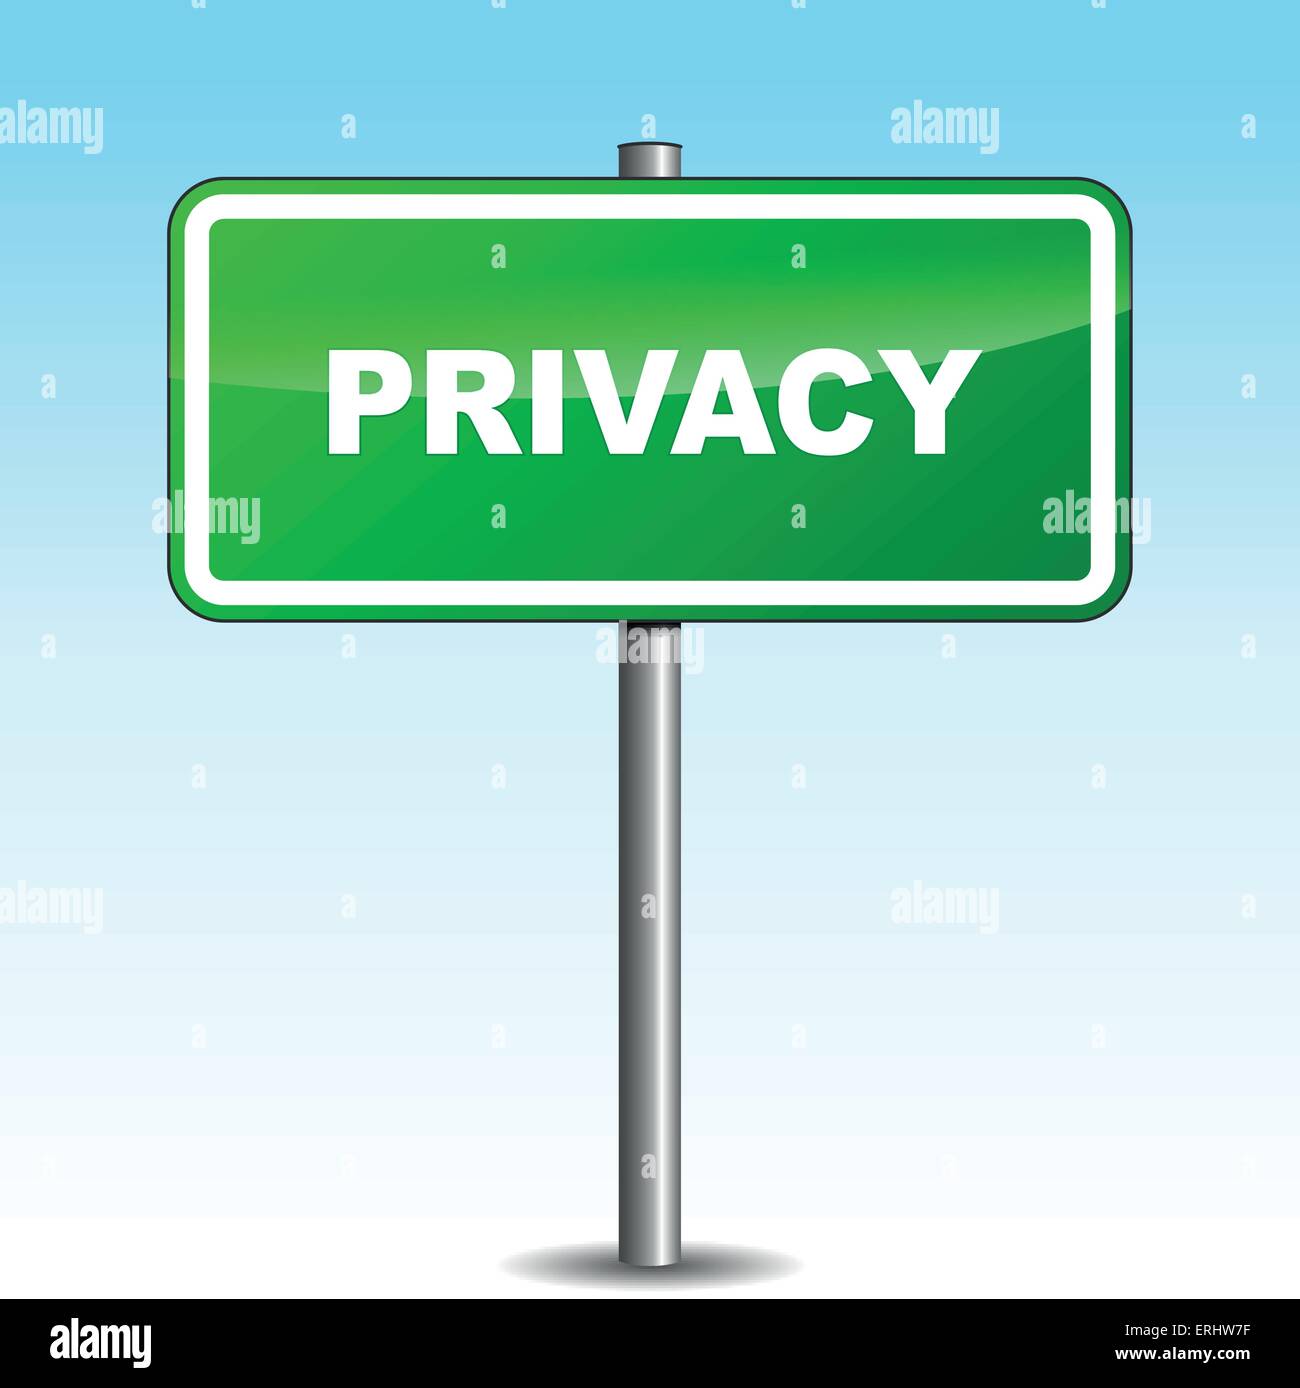 Vector illustration of privacy signpost on sky background Stock Vector